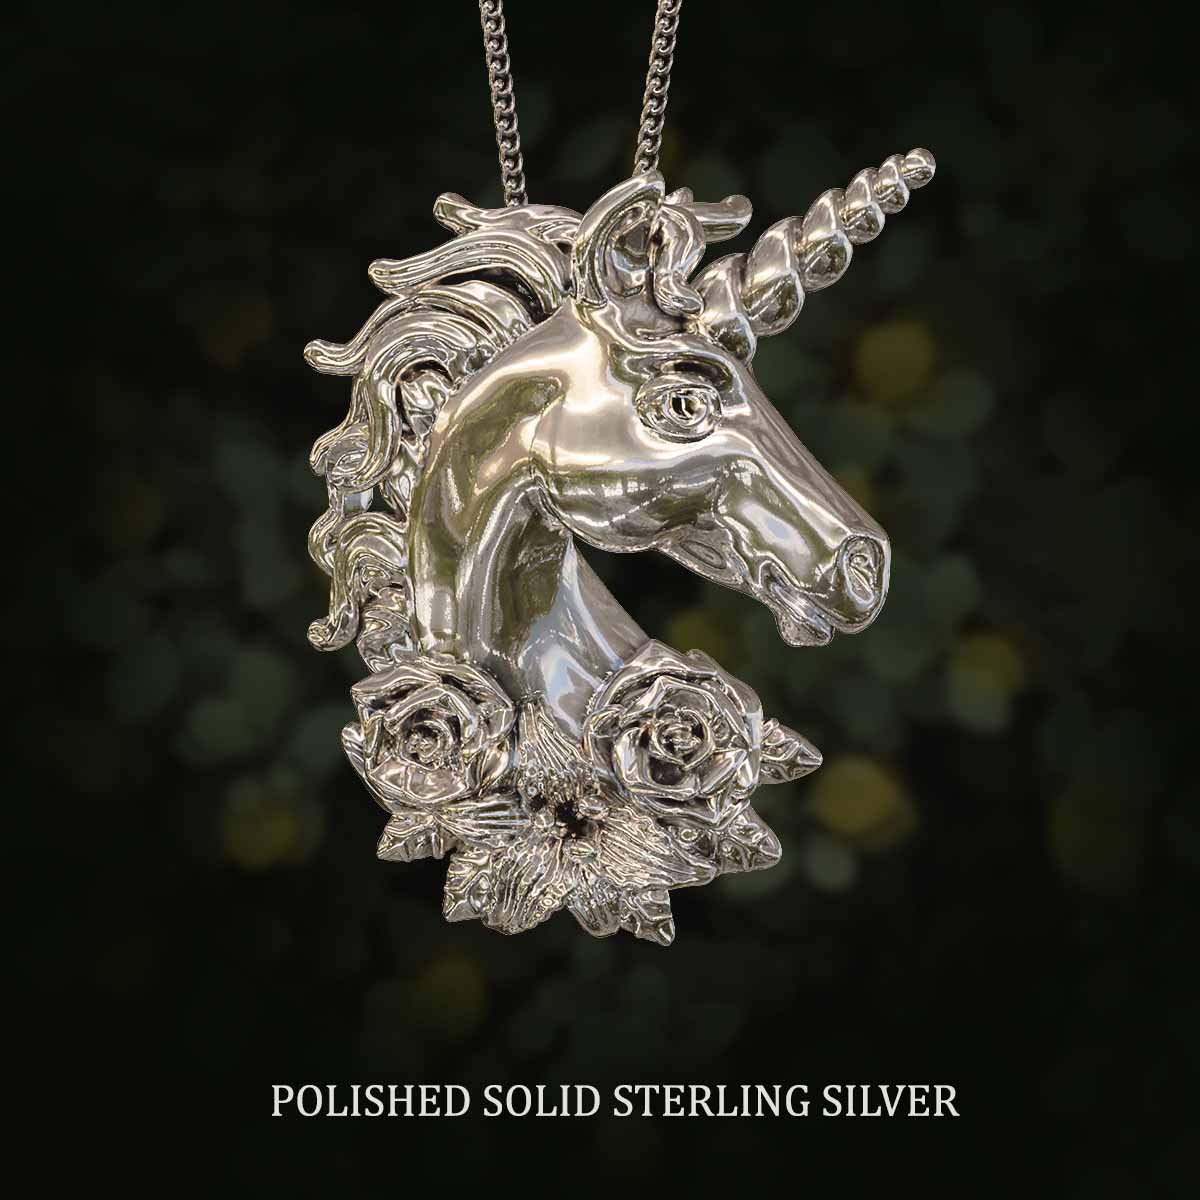     Polished-Solid-Sterling-Silver-Unicorn-With-Flowers-Pendant-Jewelry-For-Necklace